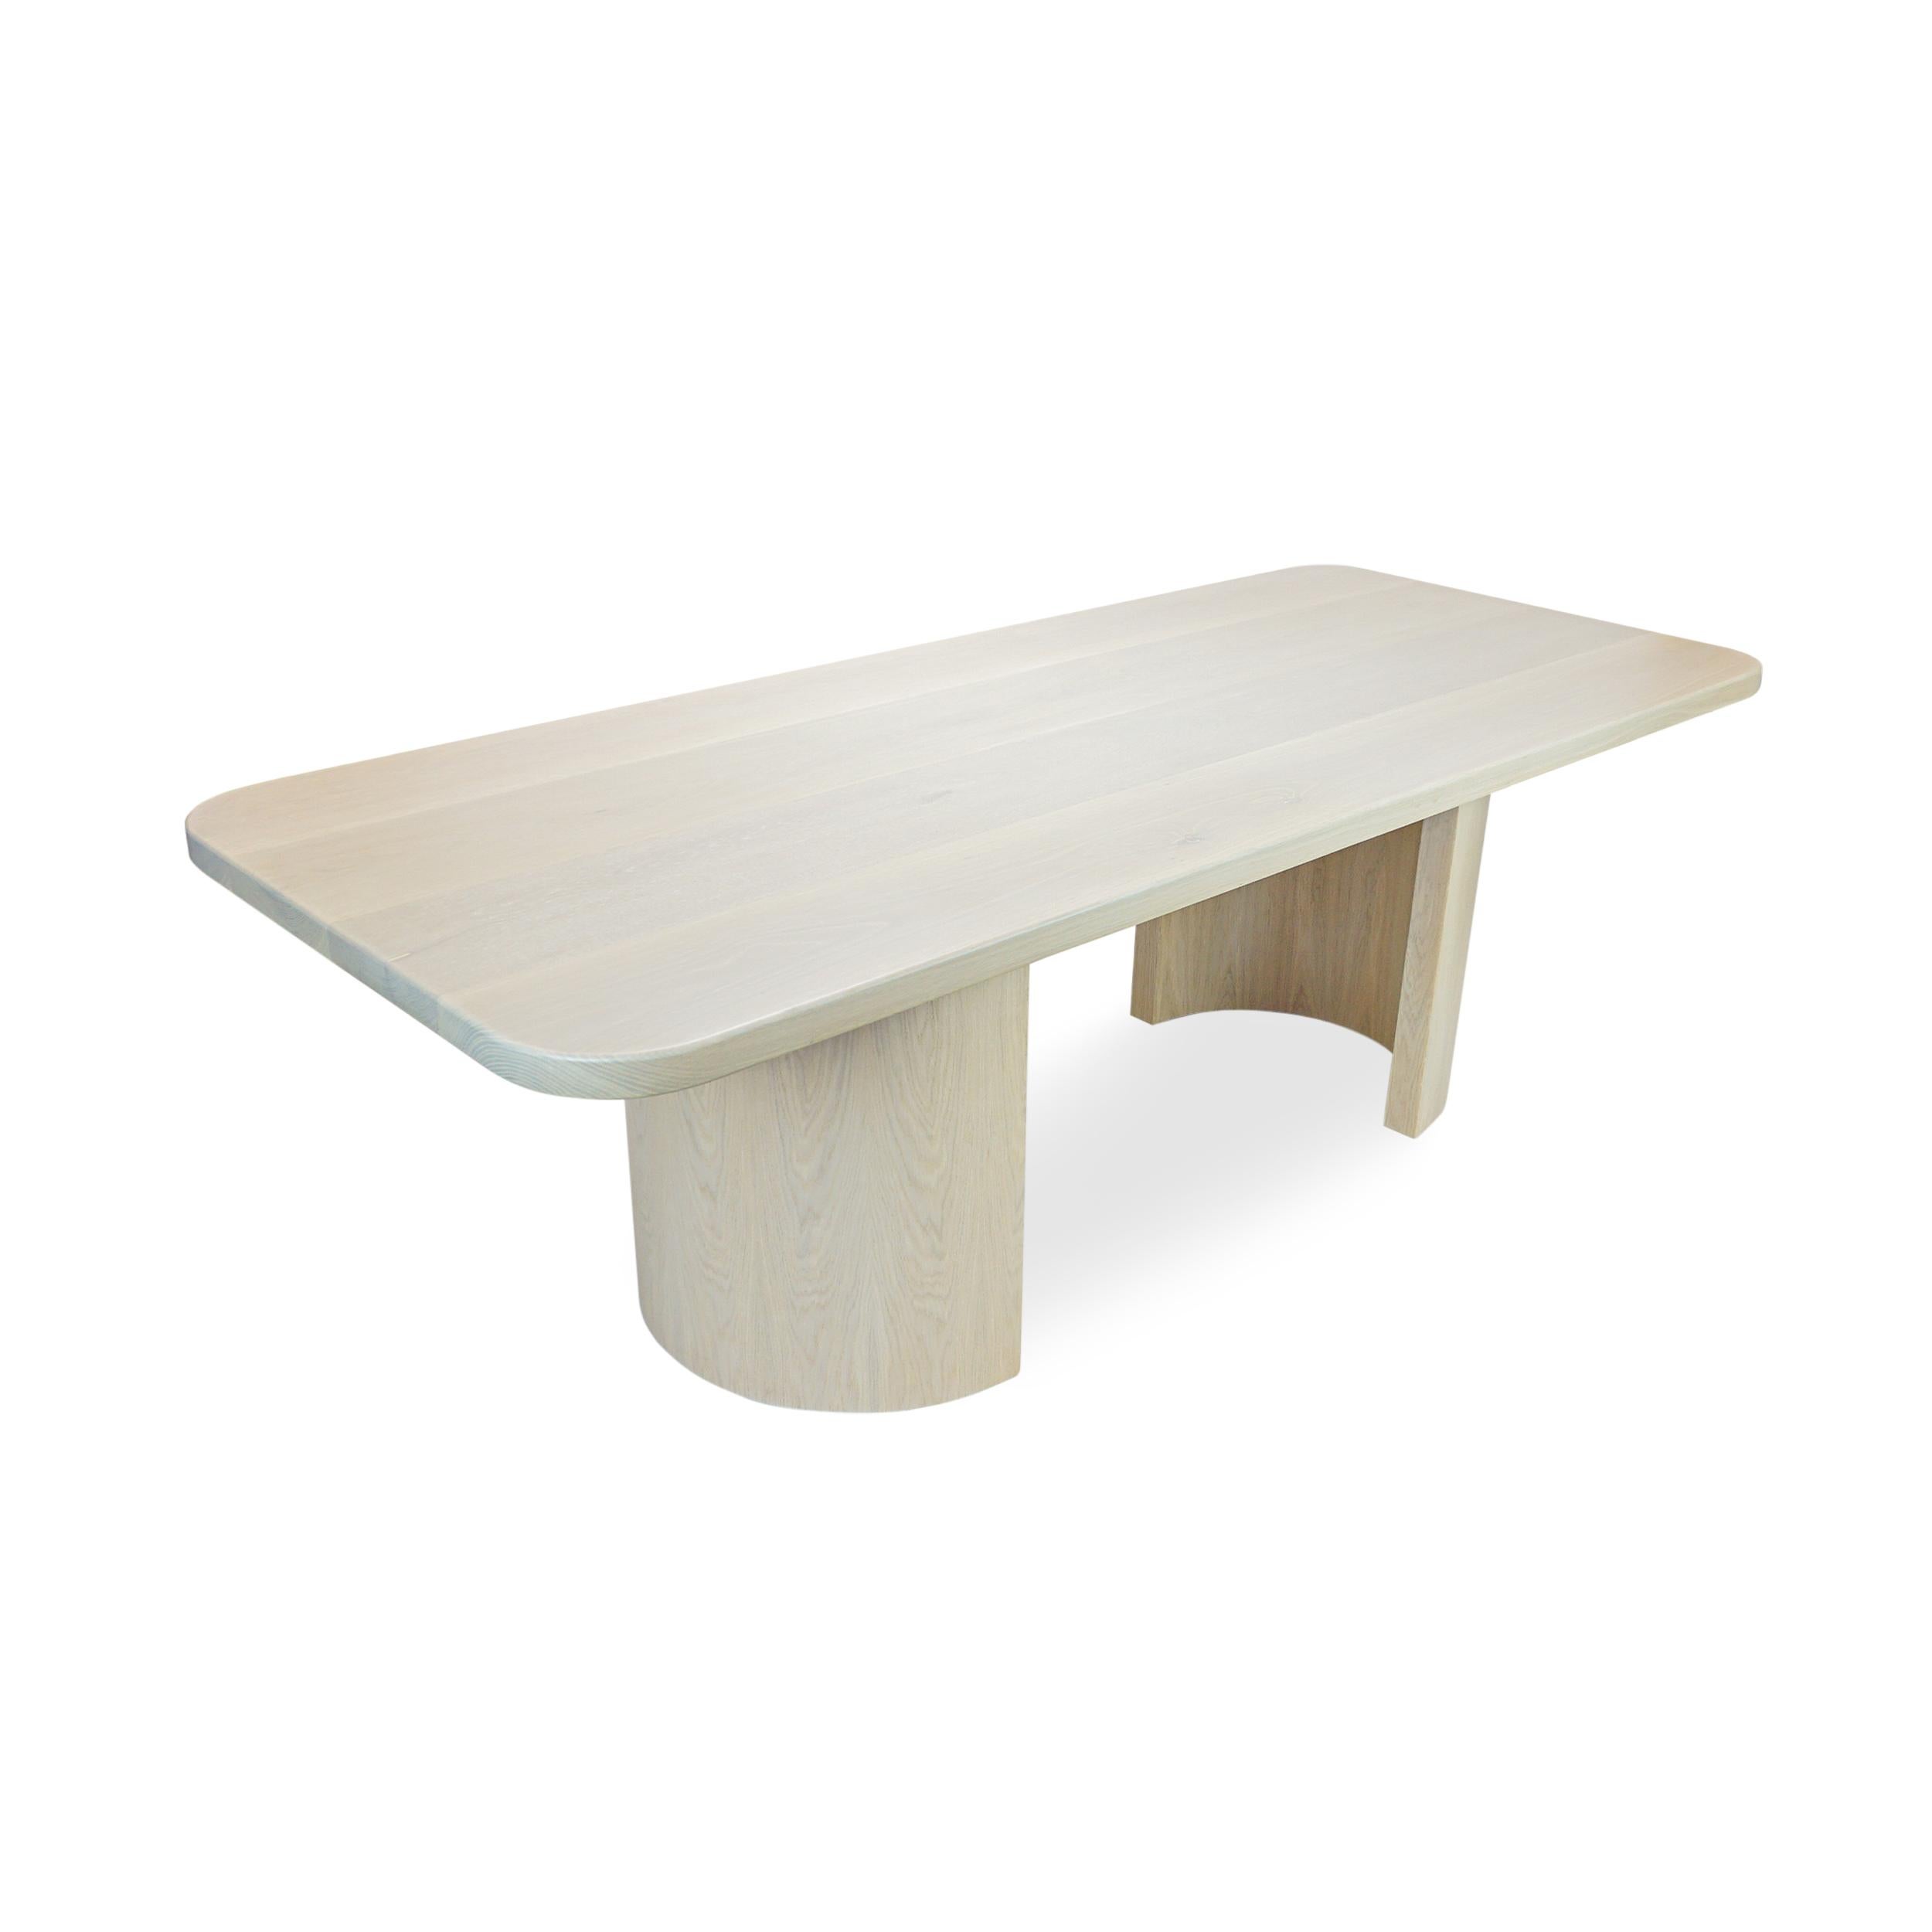 Stained Modern Rectangular White Oak Dining Table W/ Half Cylinder Legs + Round Corners For Sale